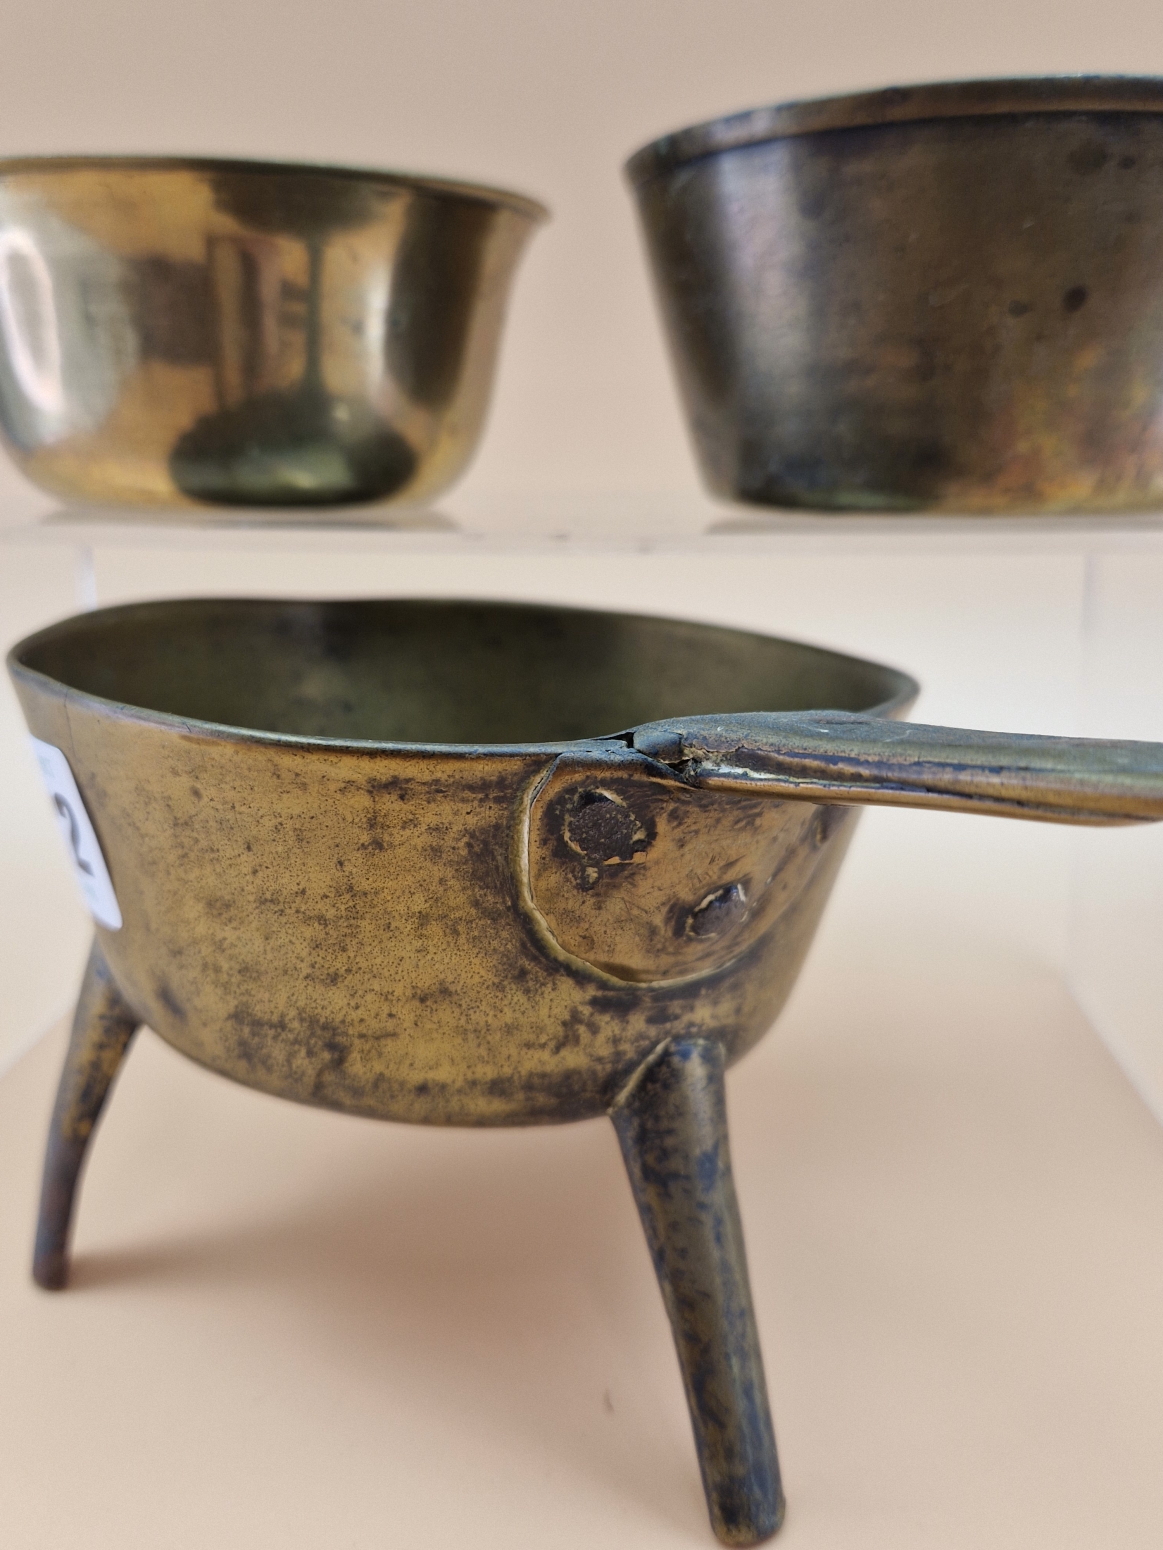 AN 18th C. BRASS TRIPOD SKILLET, A LATER BRASS SAUCEPAN TOGETHER WITH A BRASS BOWL. Dia. 10cms. - Image 5 of 6